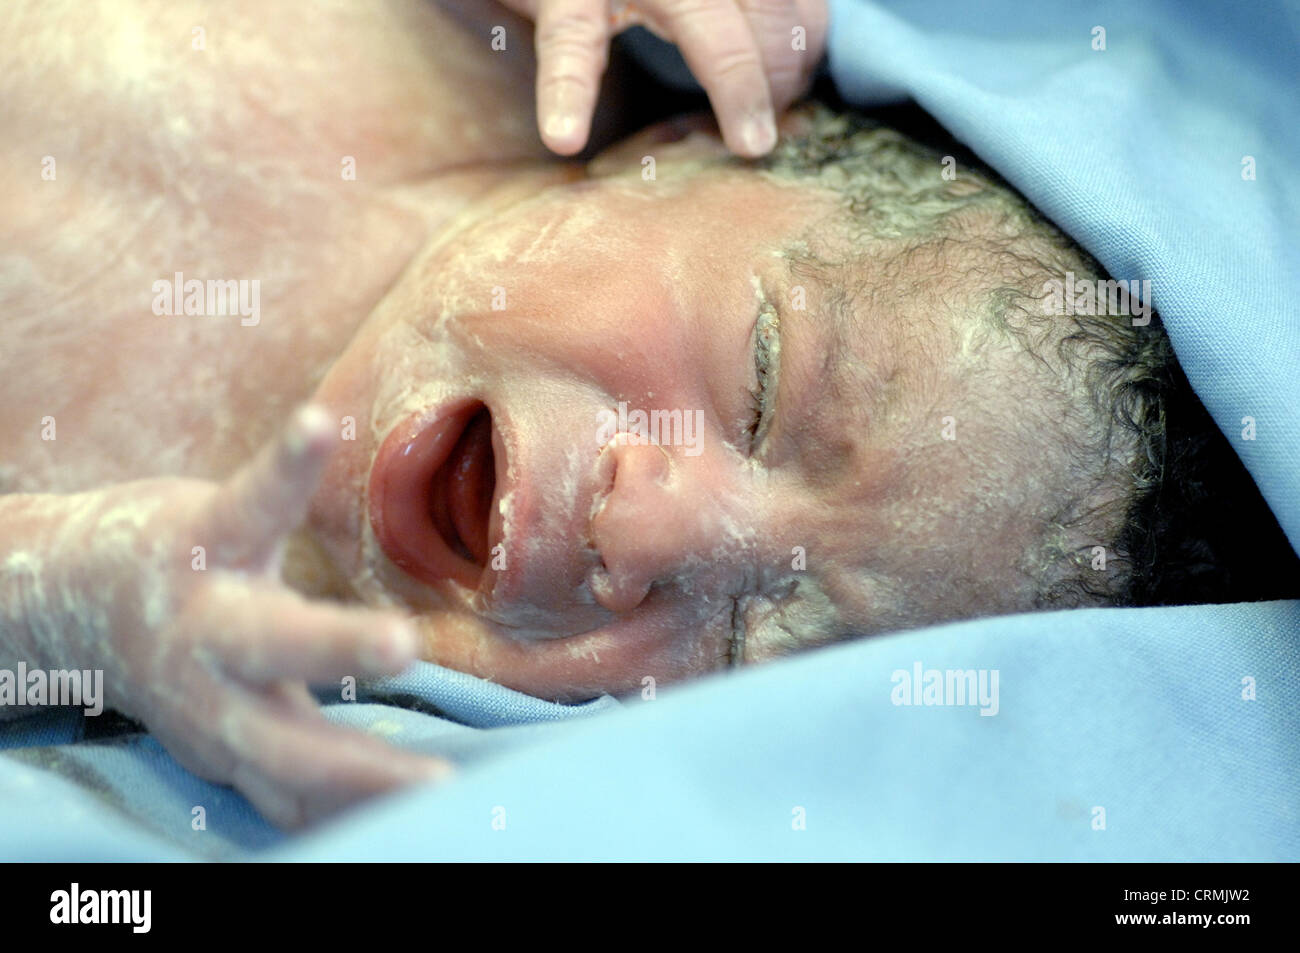 Close up of a new born baby in hospital wraps in a cot, soon after birth. A Paeditrician will clean and check the child's health before presenting her to her mother. Stock Photo